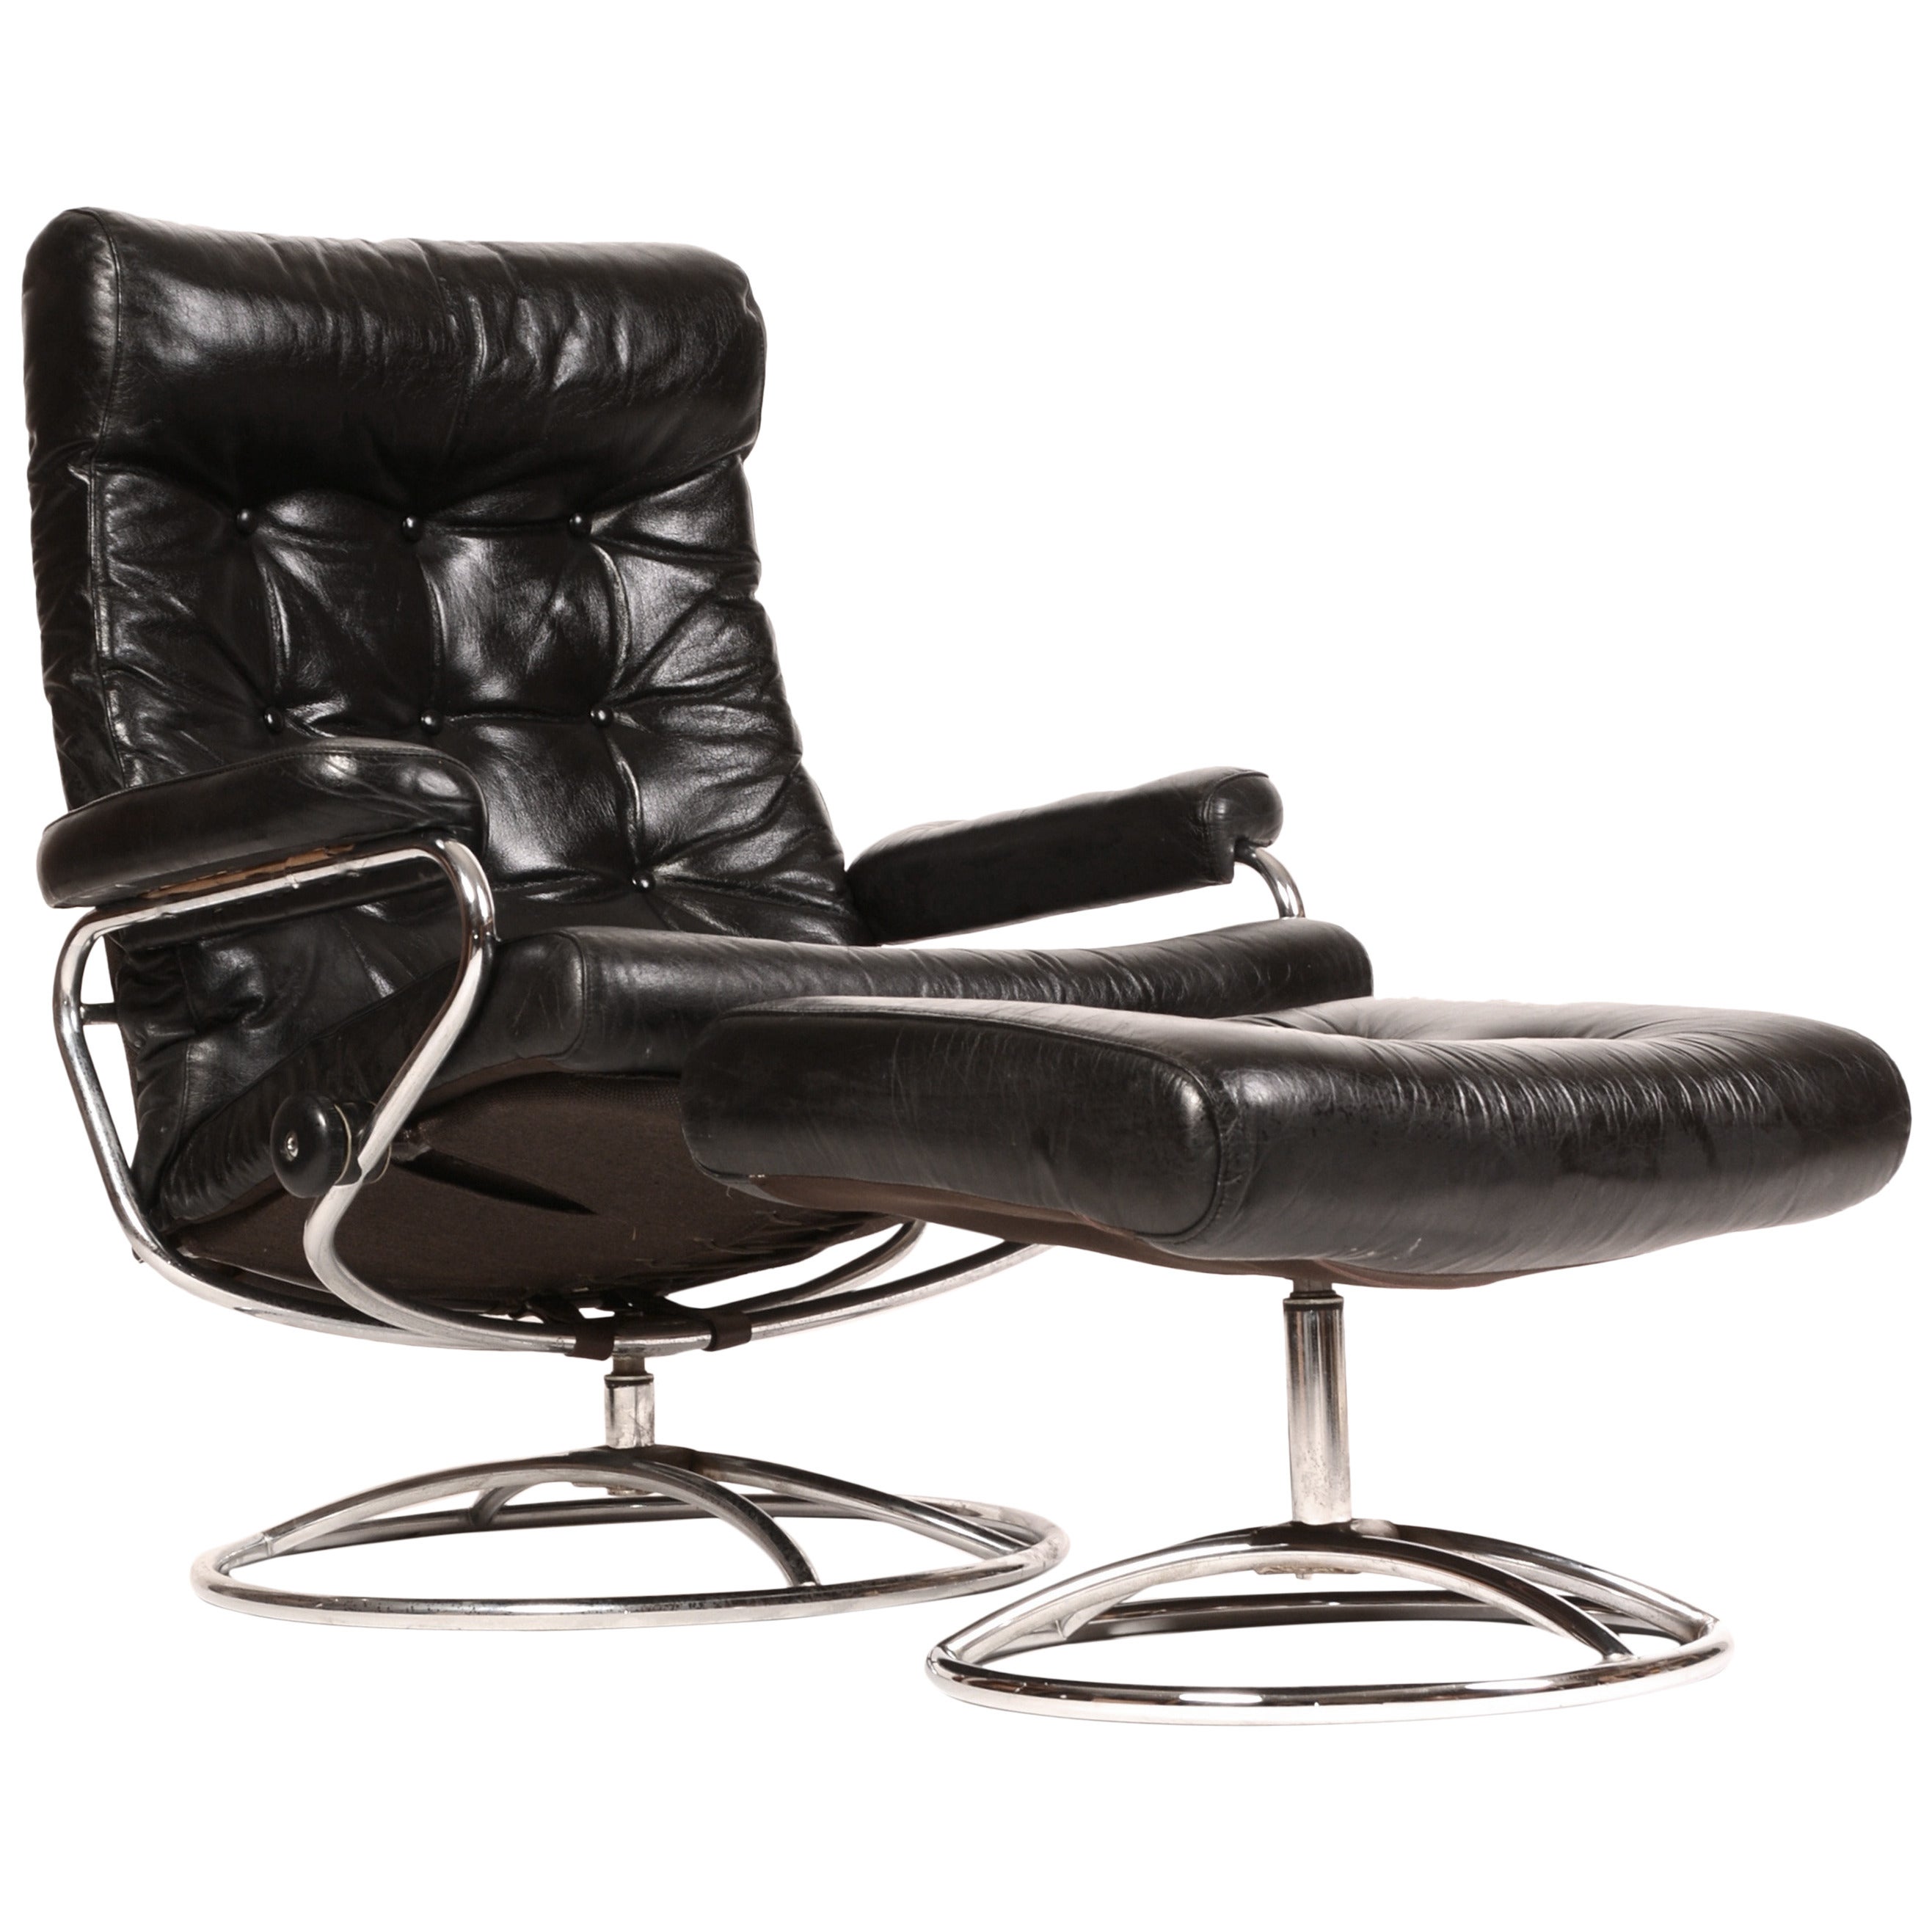 Reclining Stressless Lounge Chair and Ottoman by Ekornes